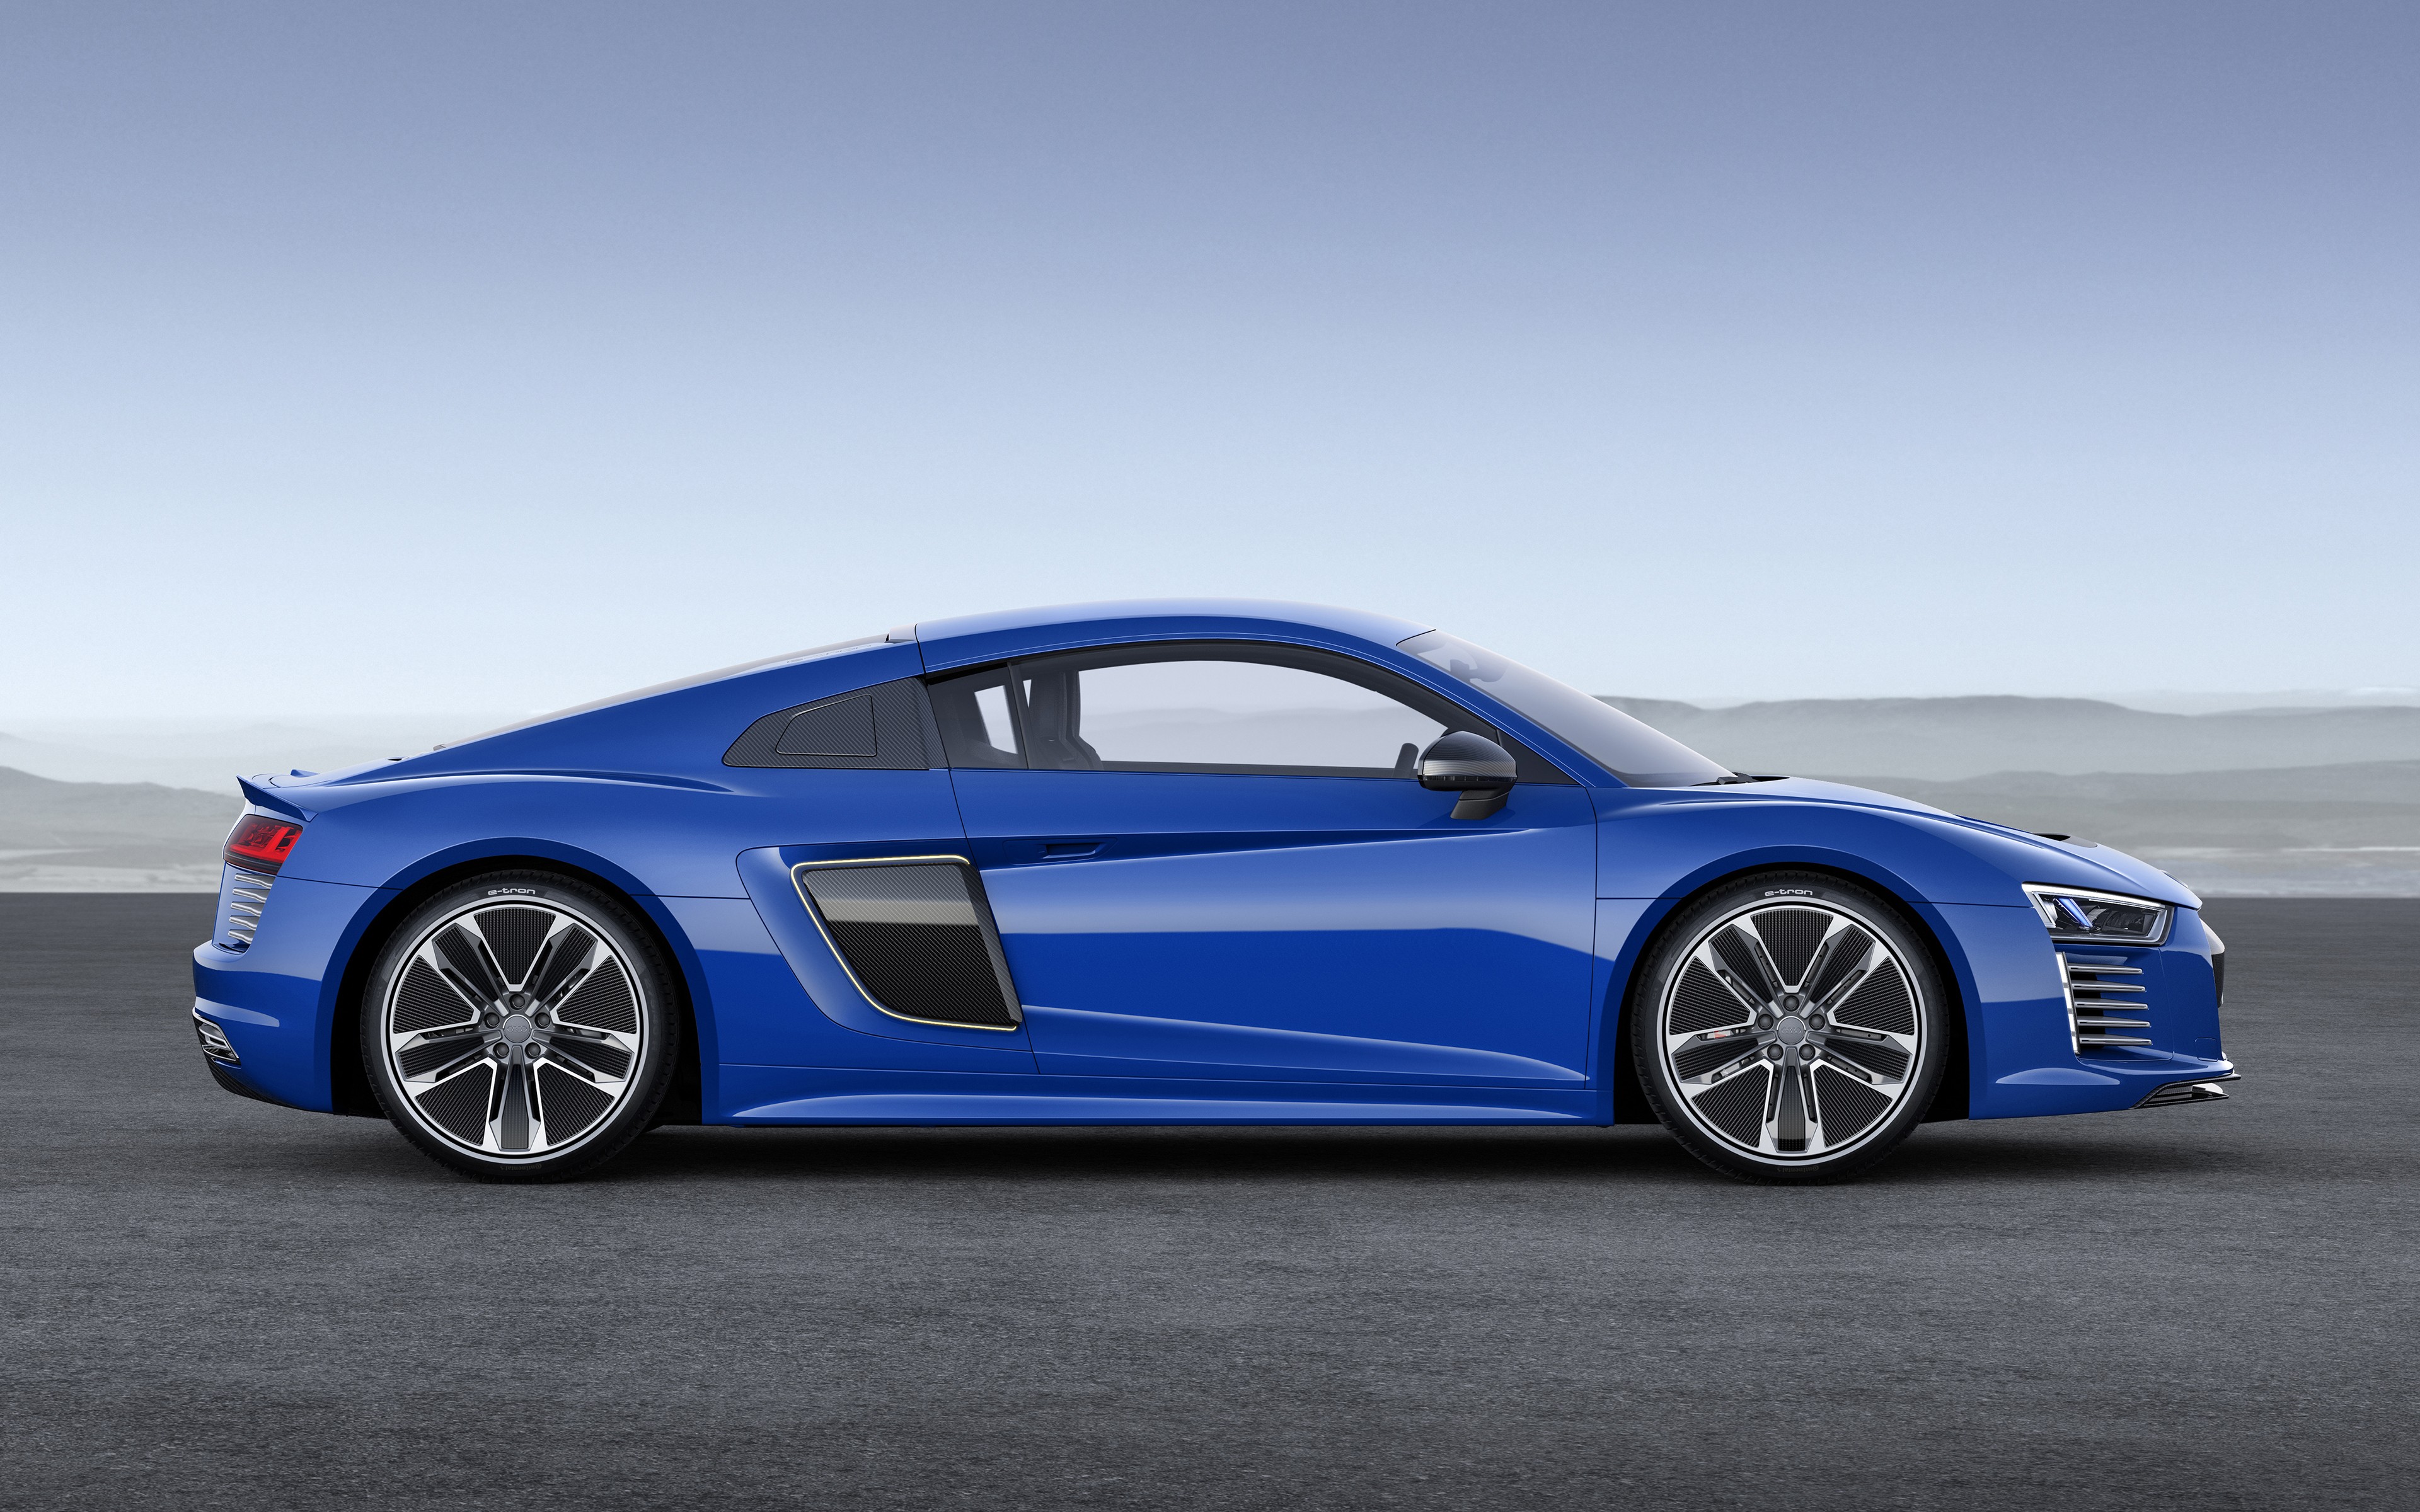 General 3840x2400 Audi R8 car vehicle supercars electric car blue cars side view Audi German cars Volkswagen Group